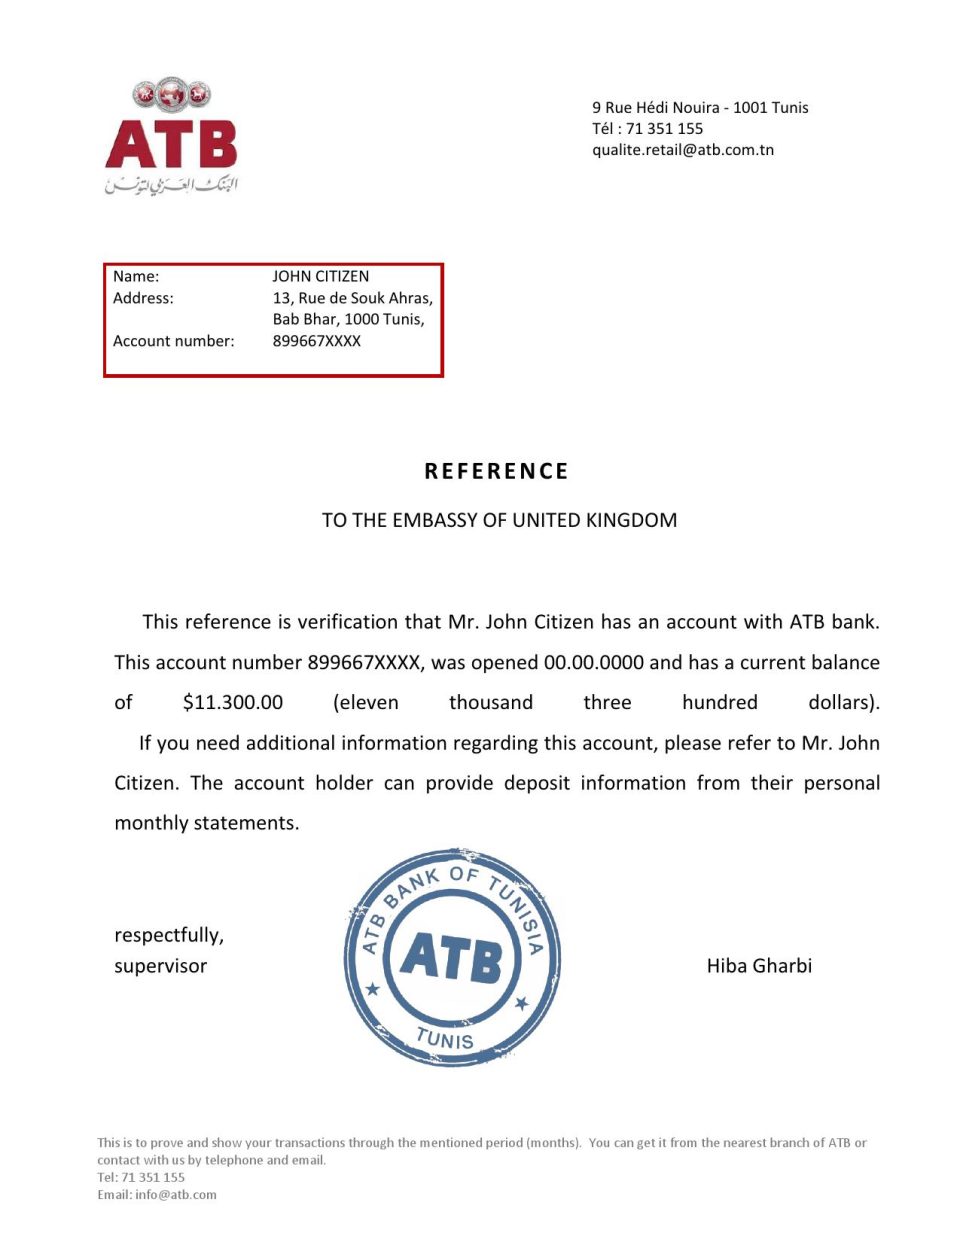 Download Tunisia ATB Bank Reference Letter Templates | Editable Word